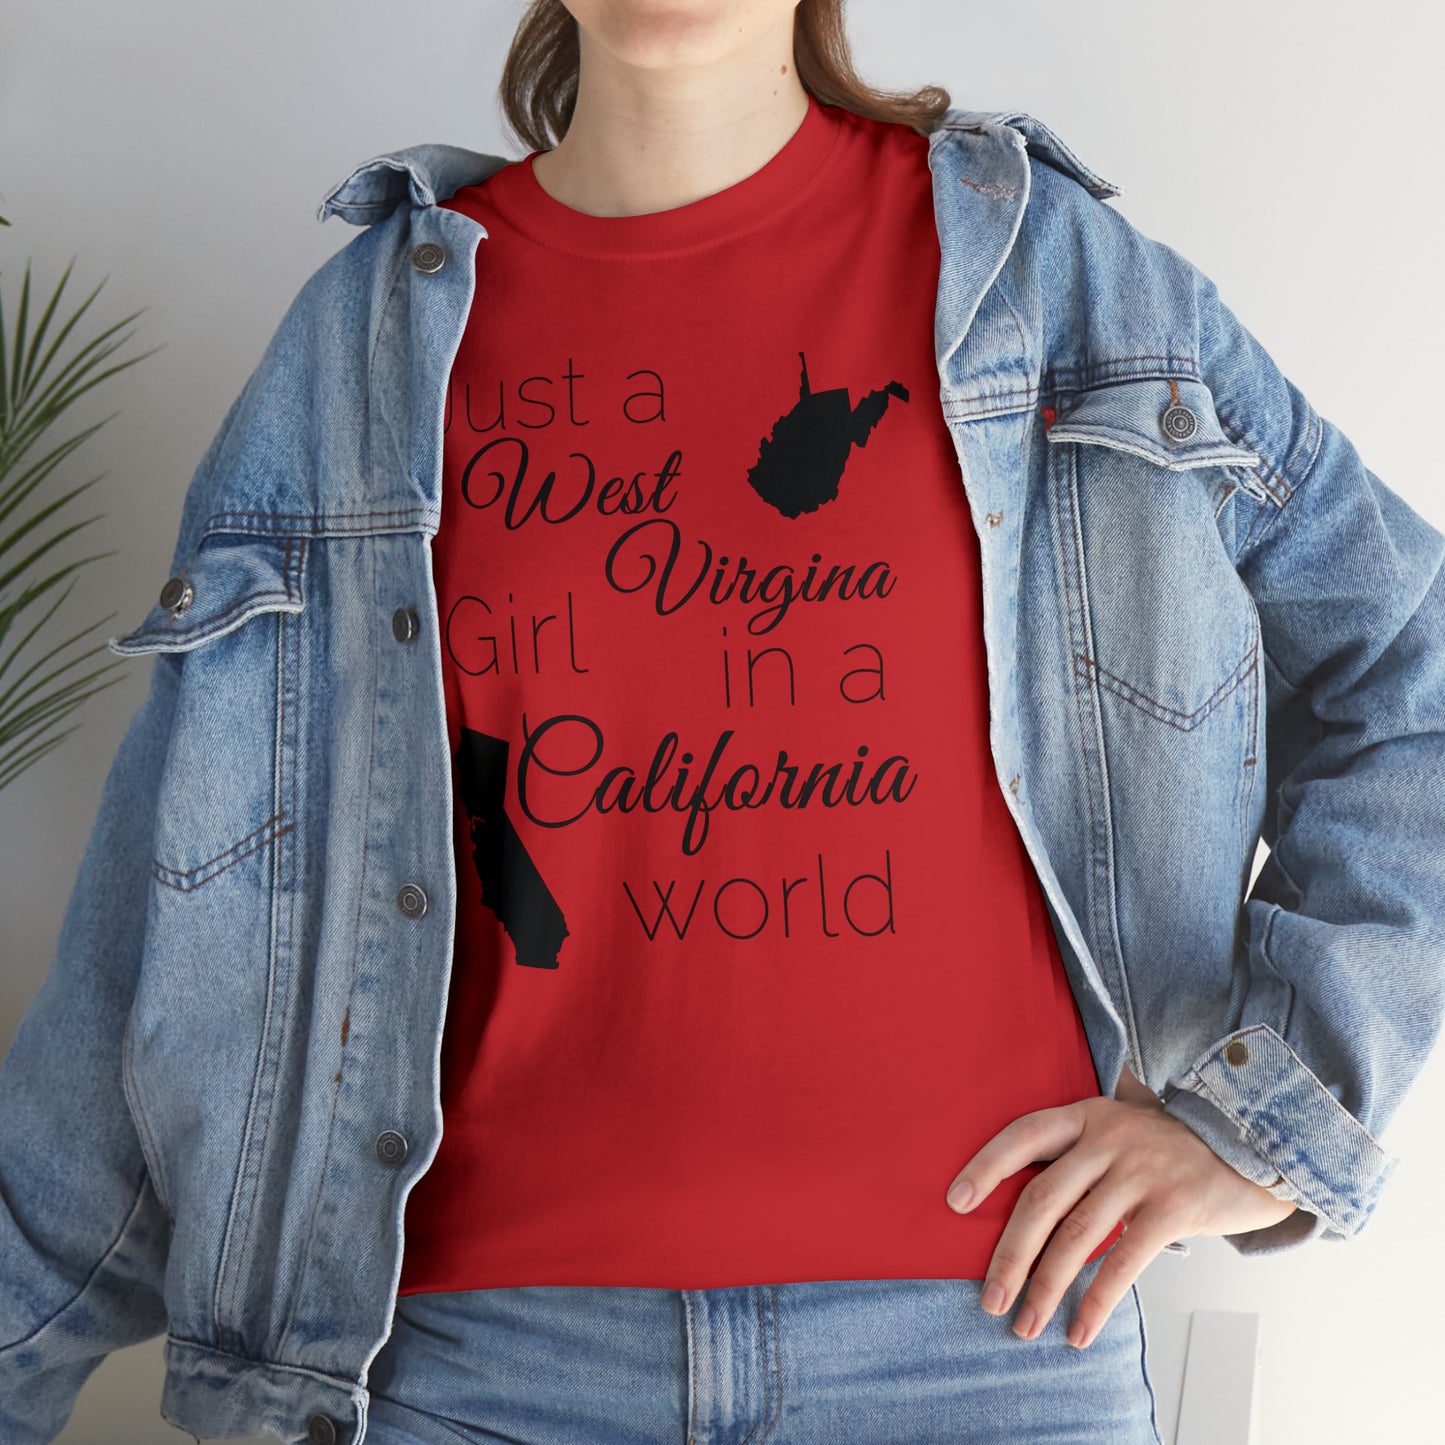 Just a West Virginia Girl in a California World Unisex Heavy Cotton Tee